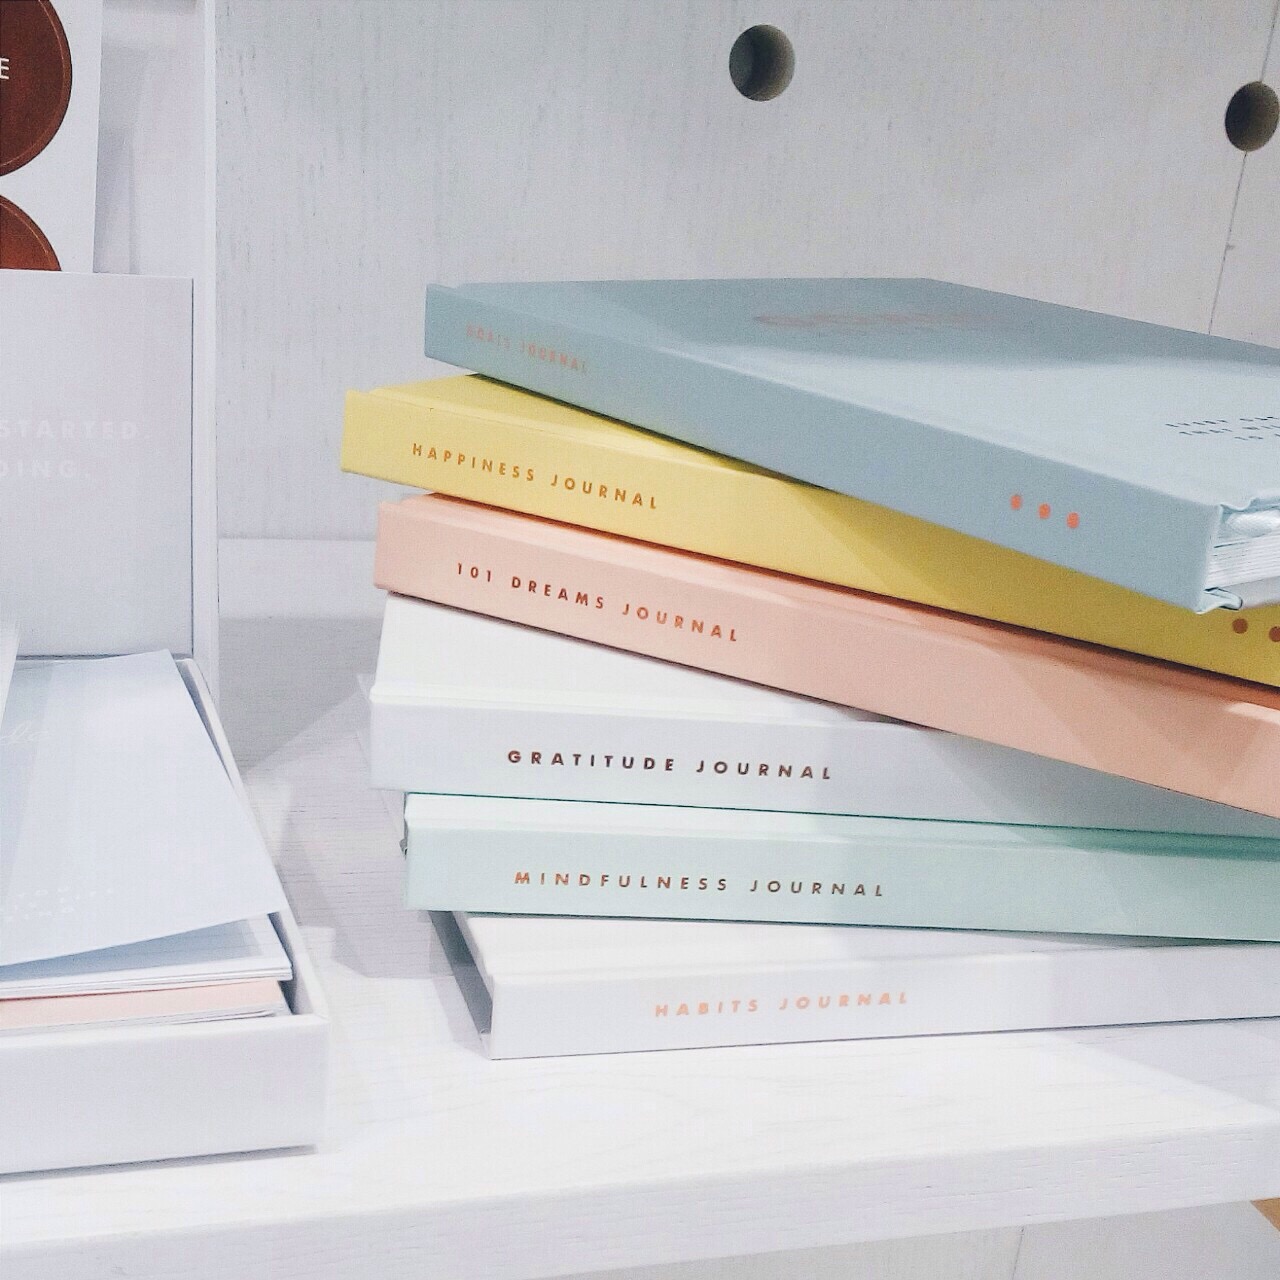 aesthetic books pastel pink yellow blue white weheartit...